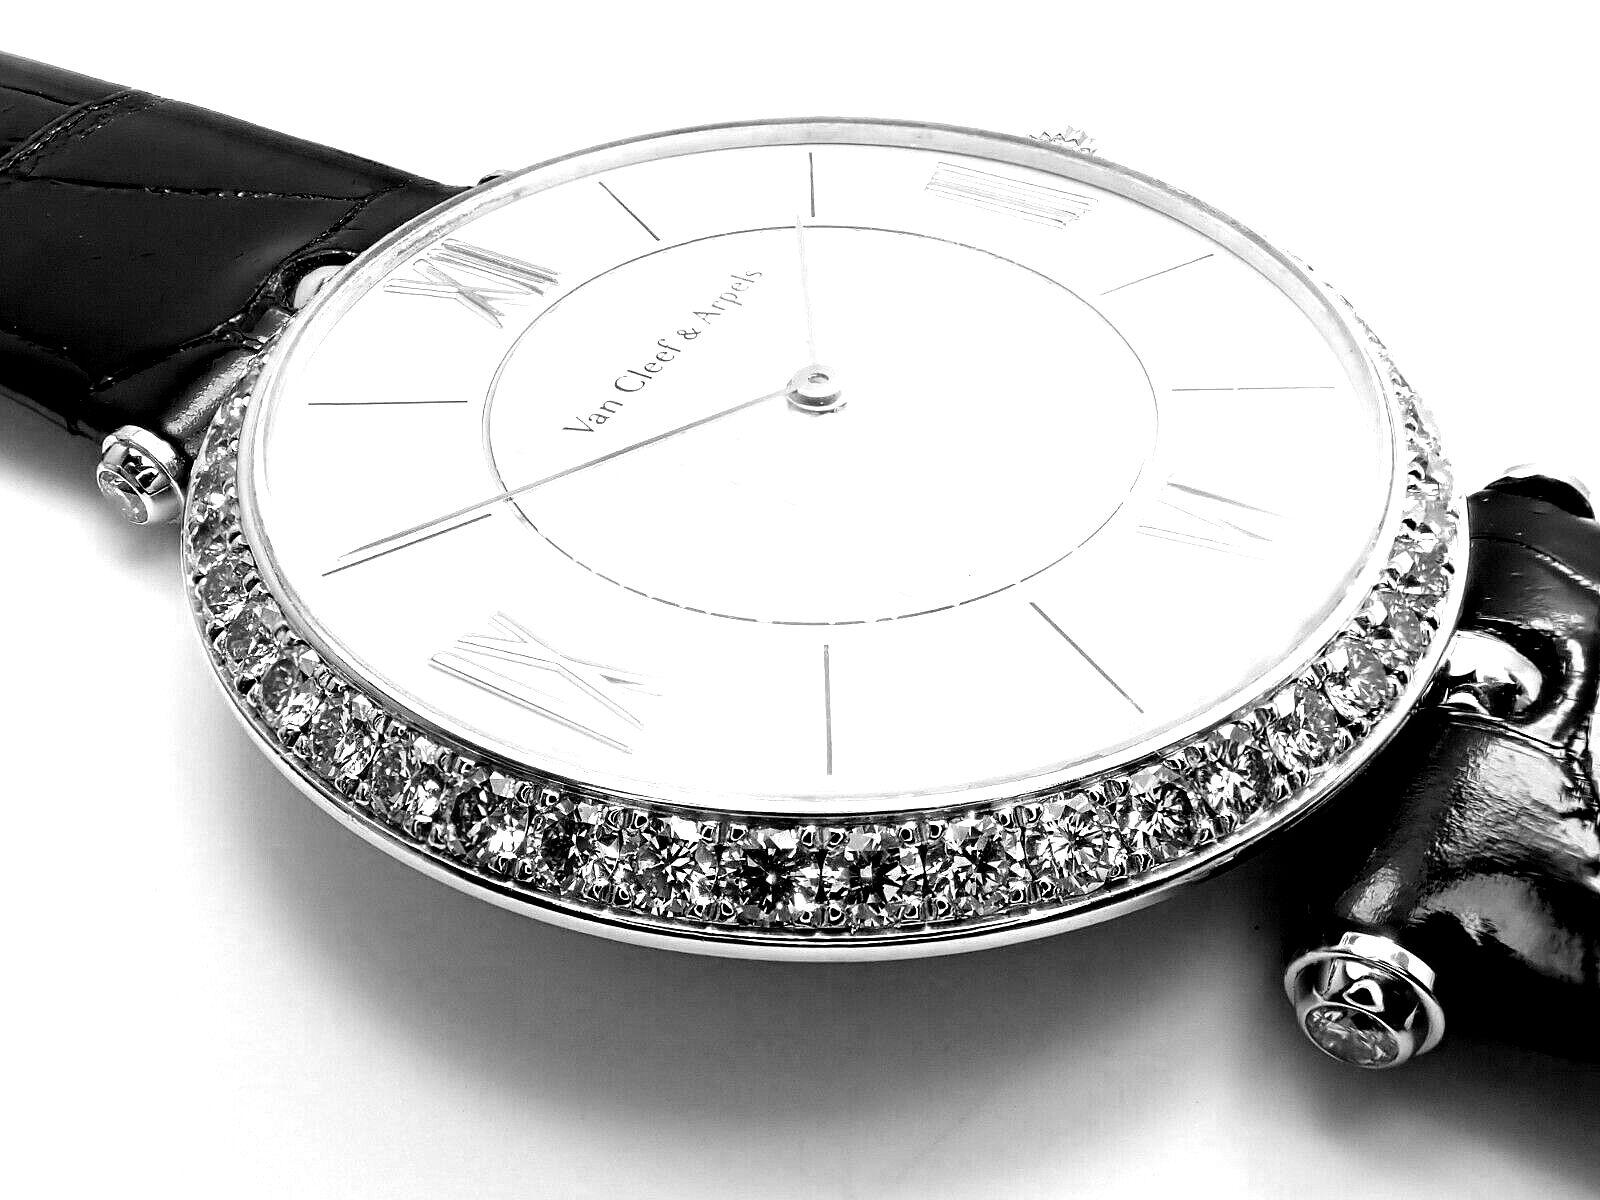 Van Cleef & Arpels Pierre Arpels Diamond White Gold Wristwatch In Excellent Condition For Sale In Holland, PA